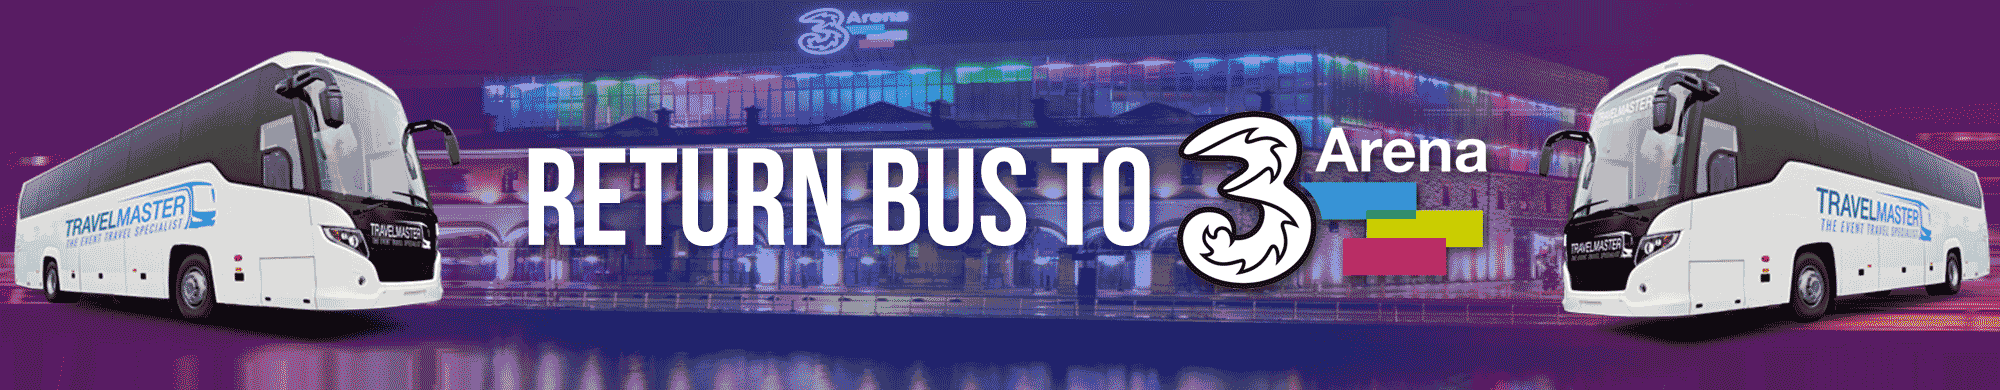 Bus Service to 3 Arena